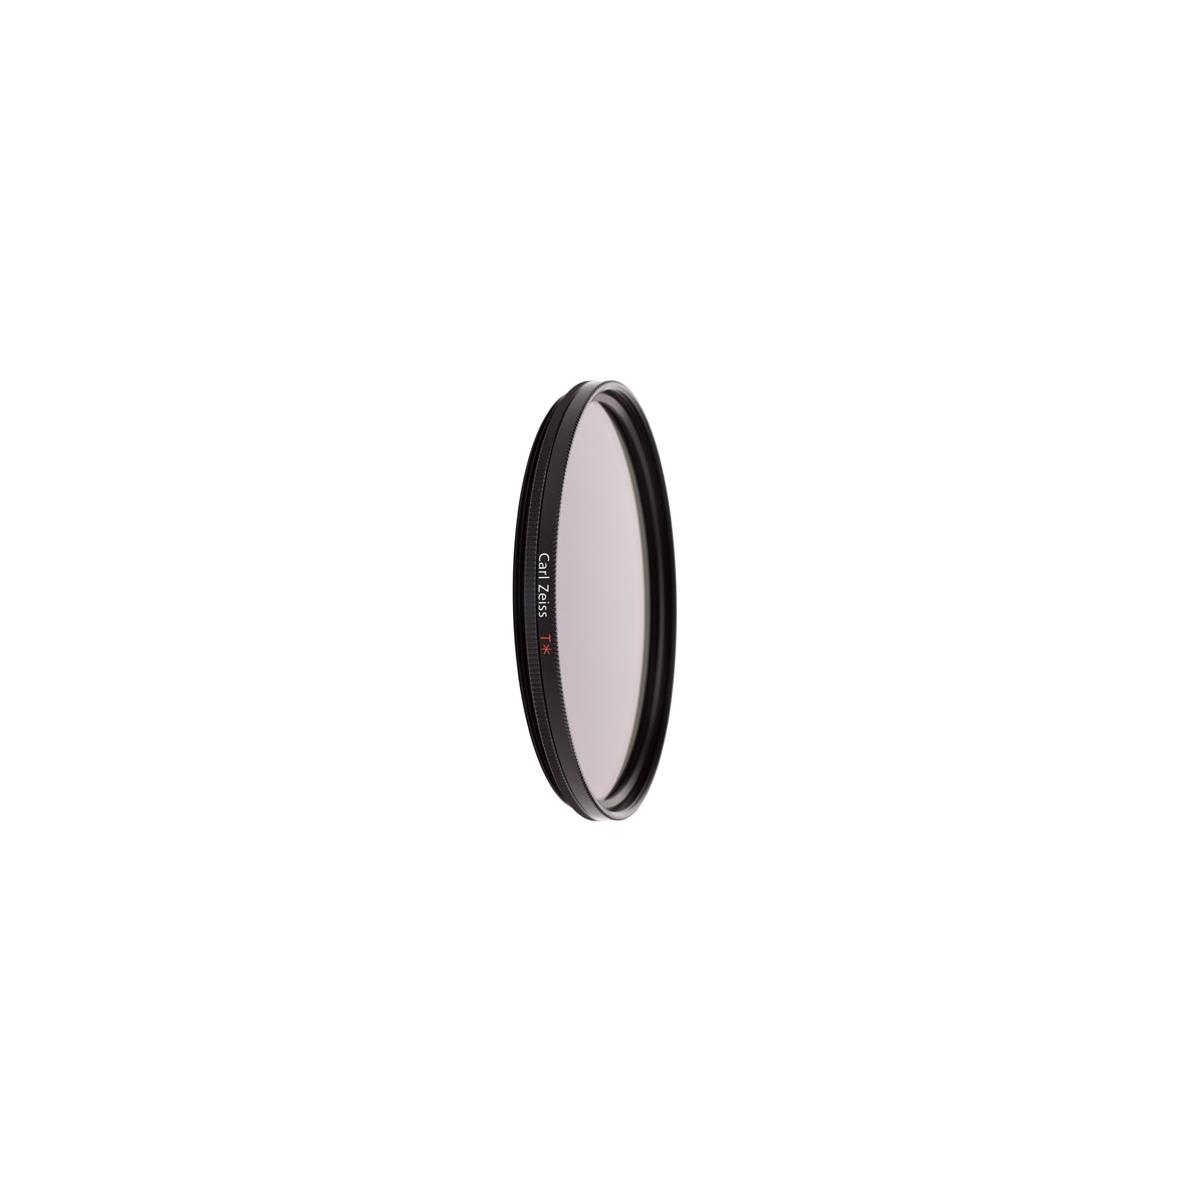 Zeiss 58mm T* Coated Circular Polarizing Filter